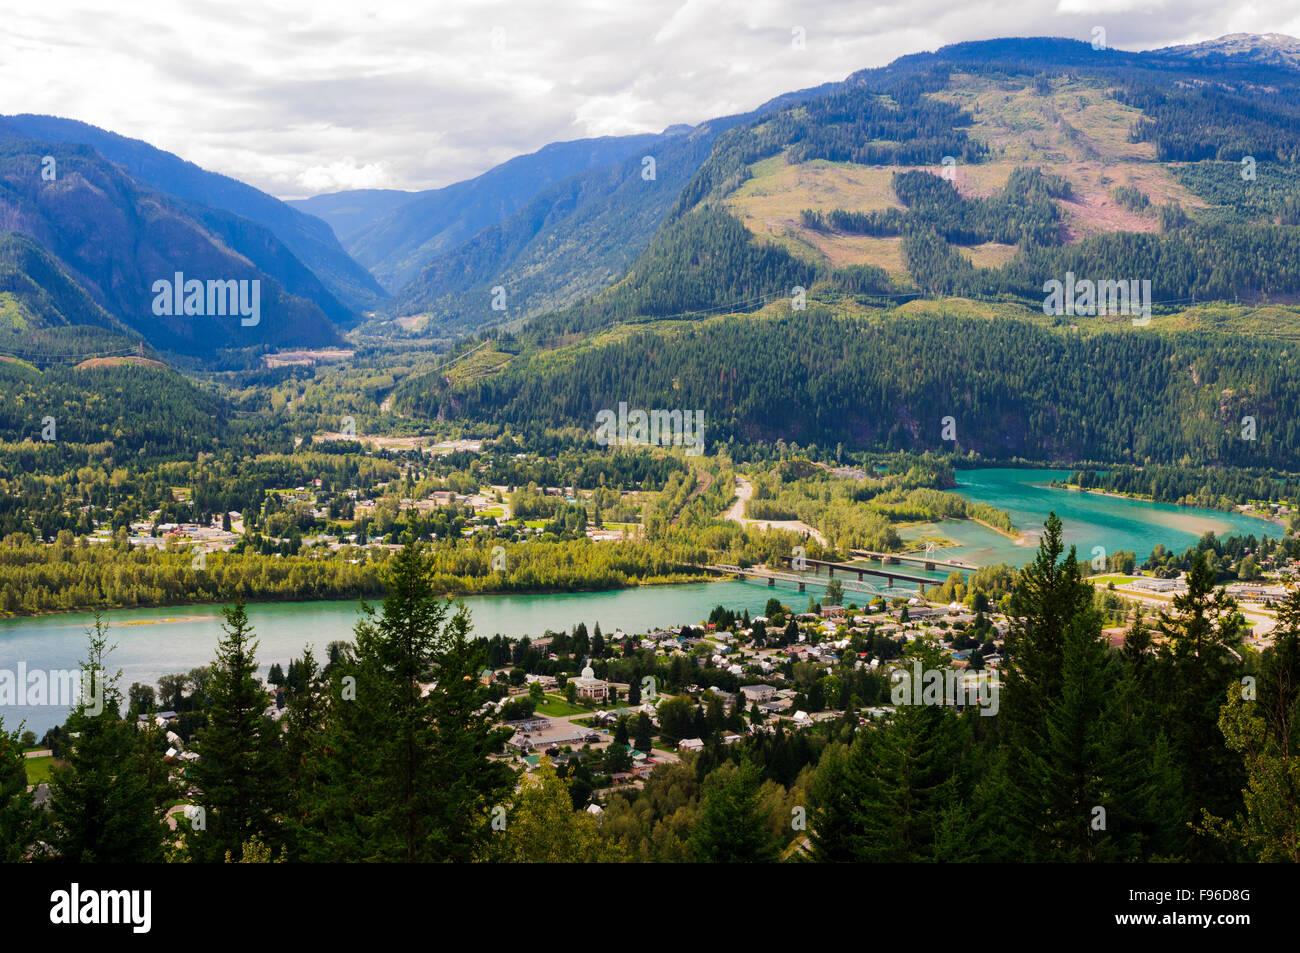 Views of the Columbia River and the town of Revelstoke, British Columbia. Stock Photo